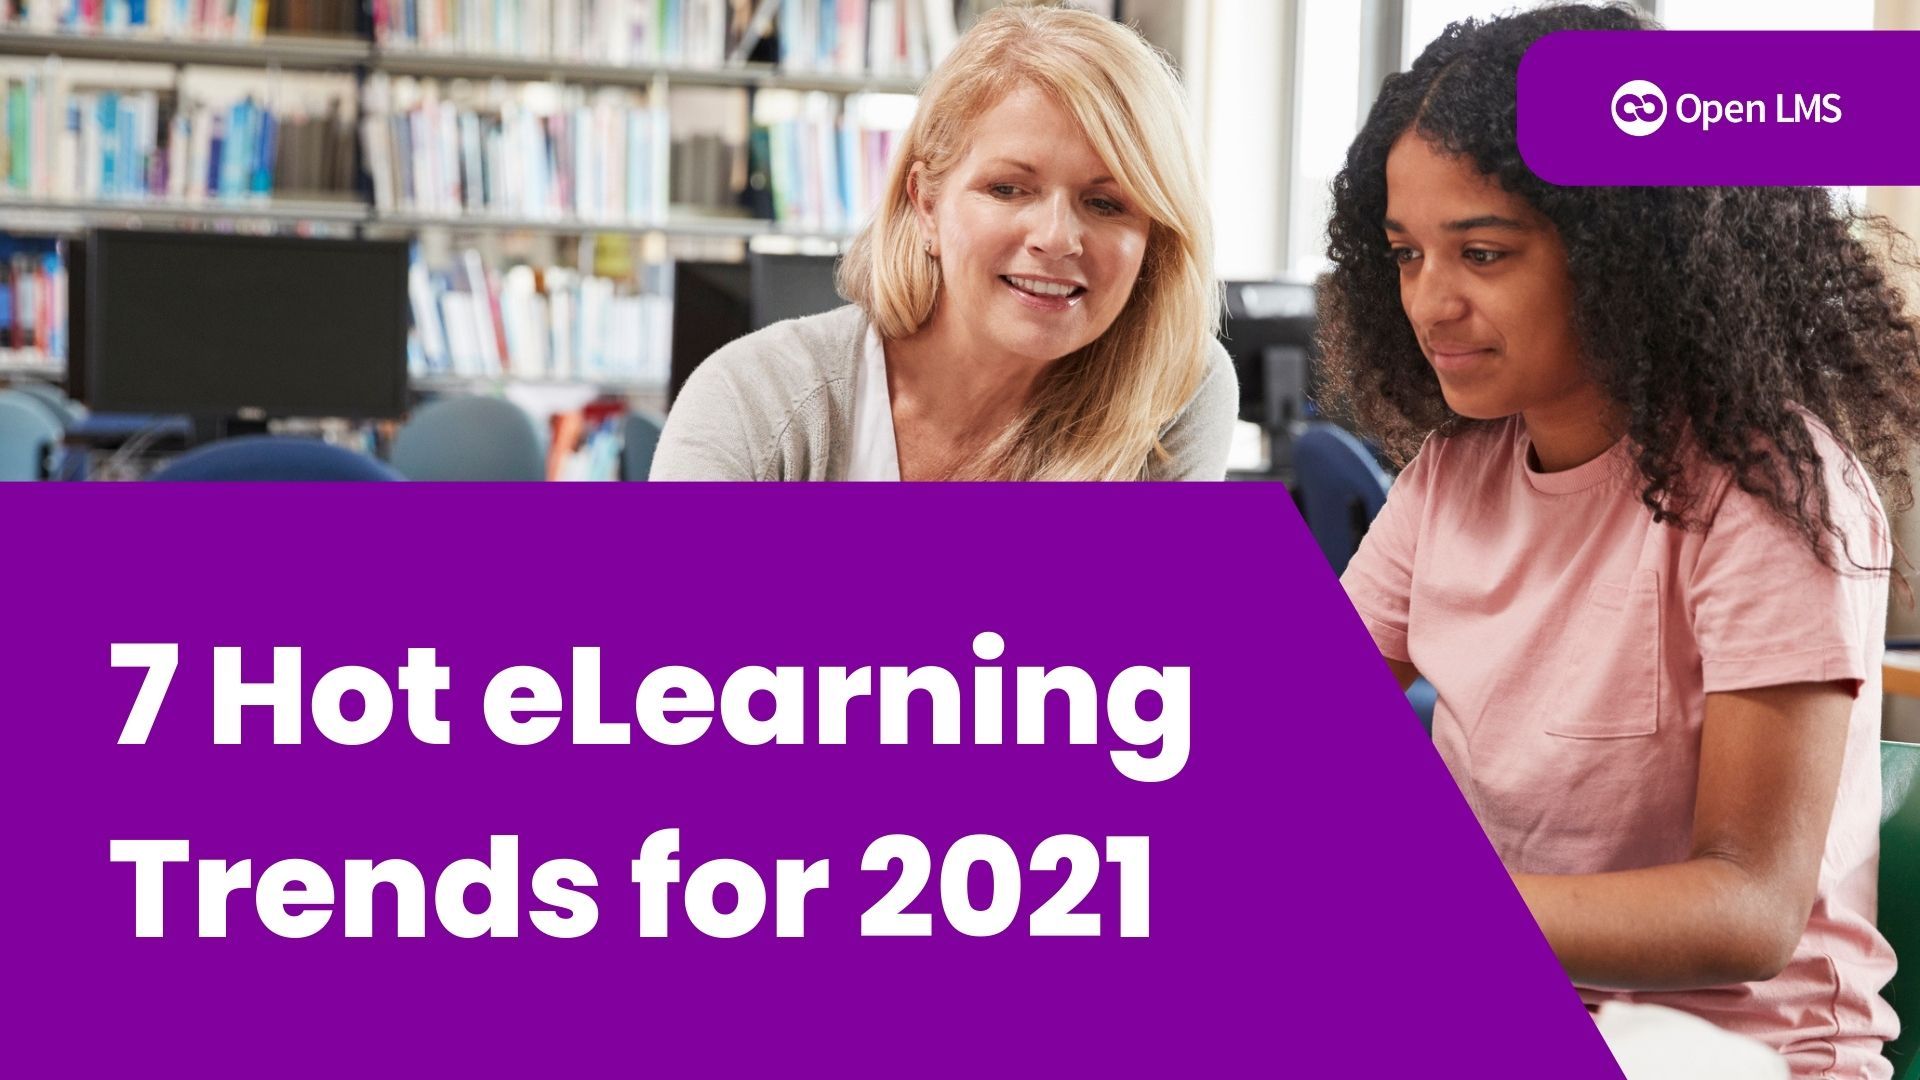 7 Hot eLearning Trends for 2021